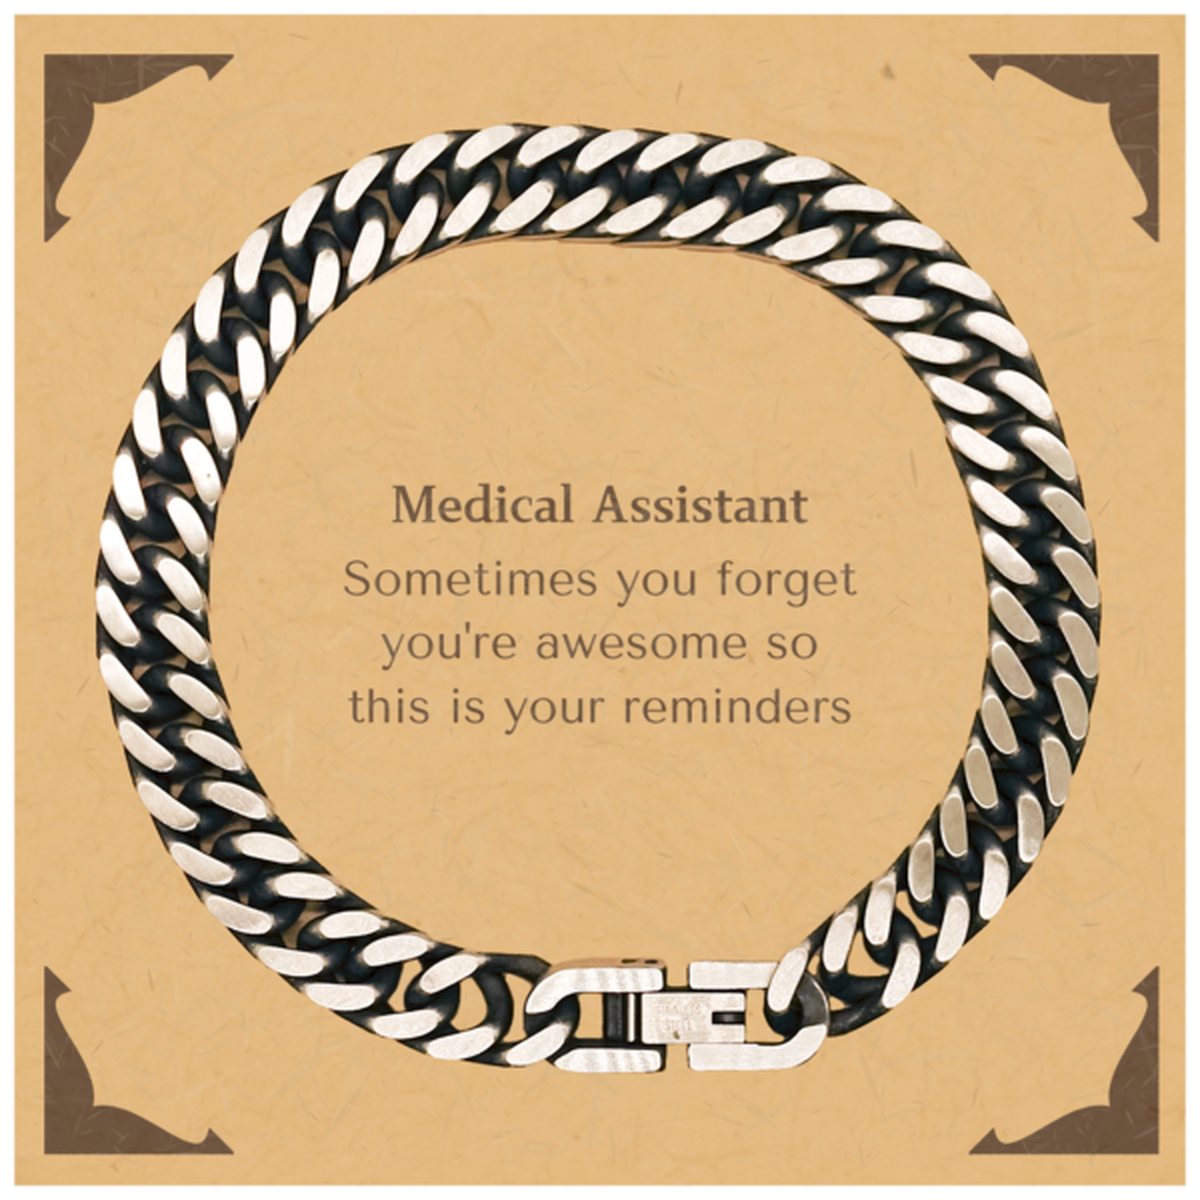 Sentimental Medical Assistant Cuban Link Chain Bracelet, Medical Assistant Sometimes you forget you're awesome so this is your reminders, Graduation Christmas Birthday Gifts for Medical Assistant, Men, Women, Coworkers